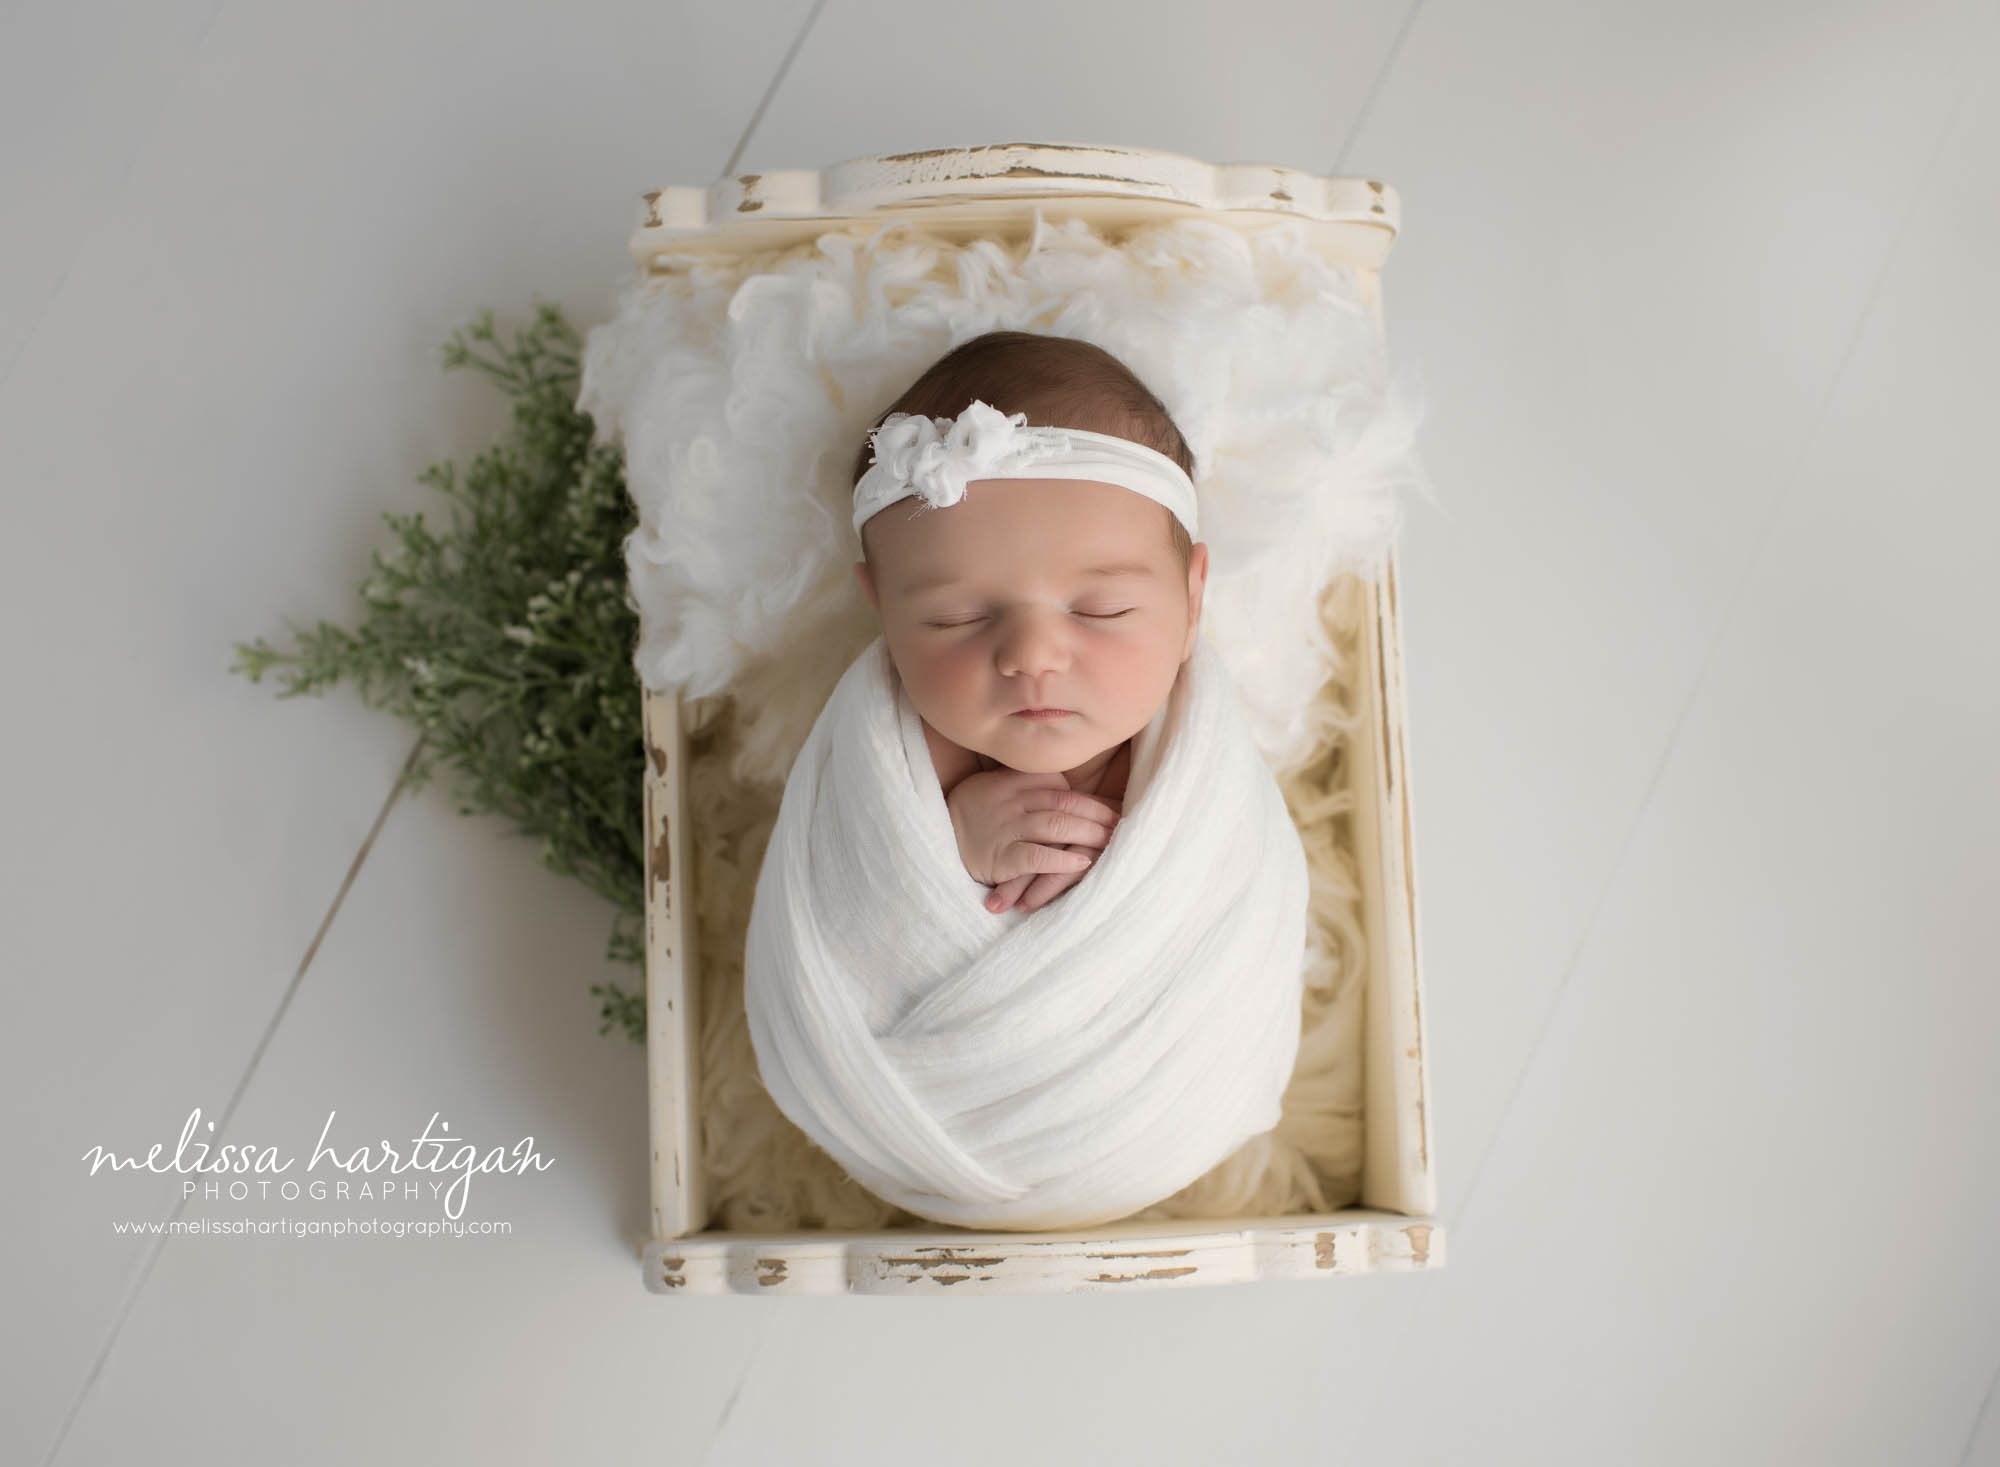 newborn baby girl posed in wooden cradle wrapped in white wrap with white headband